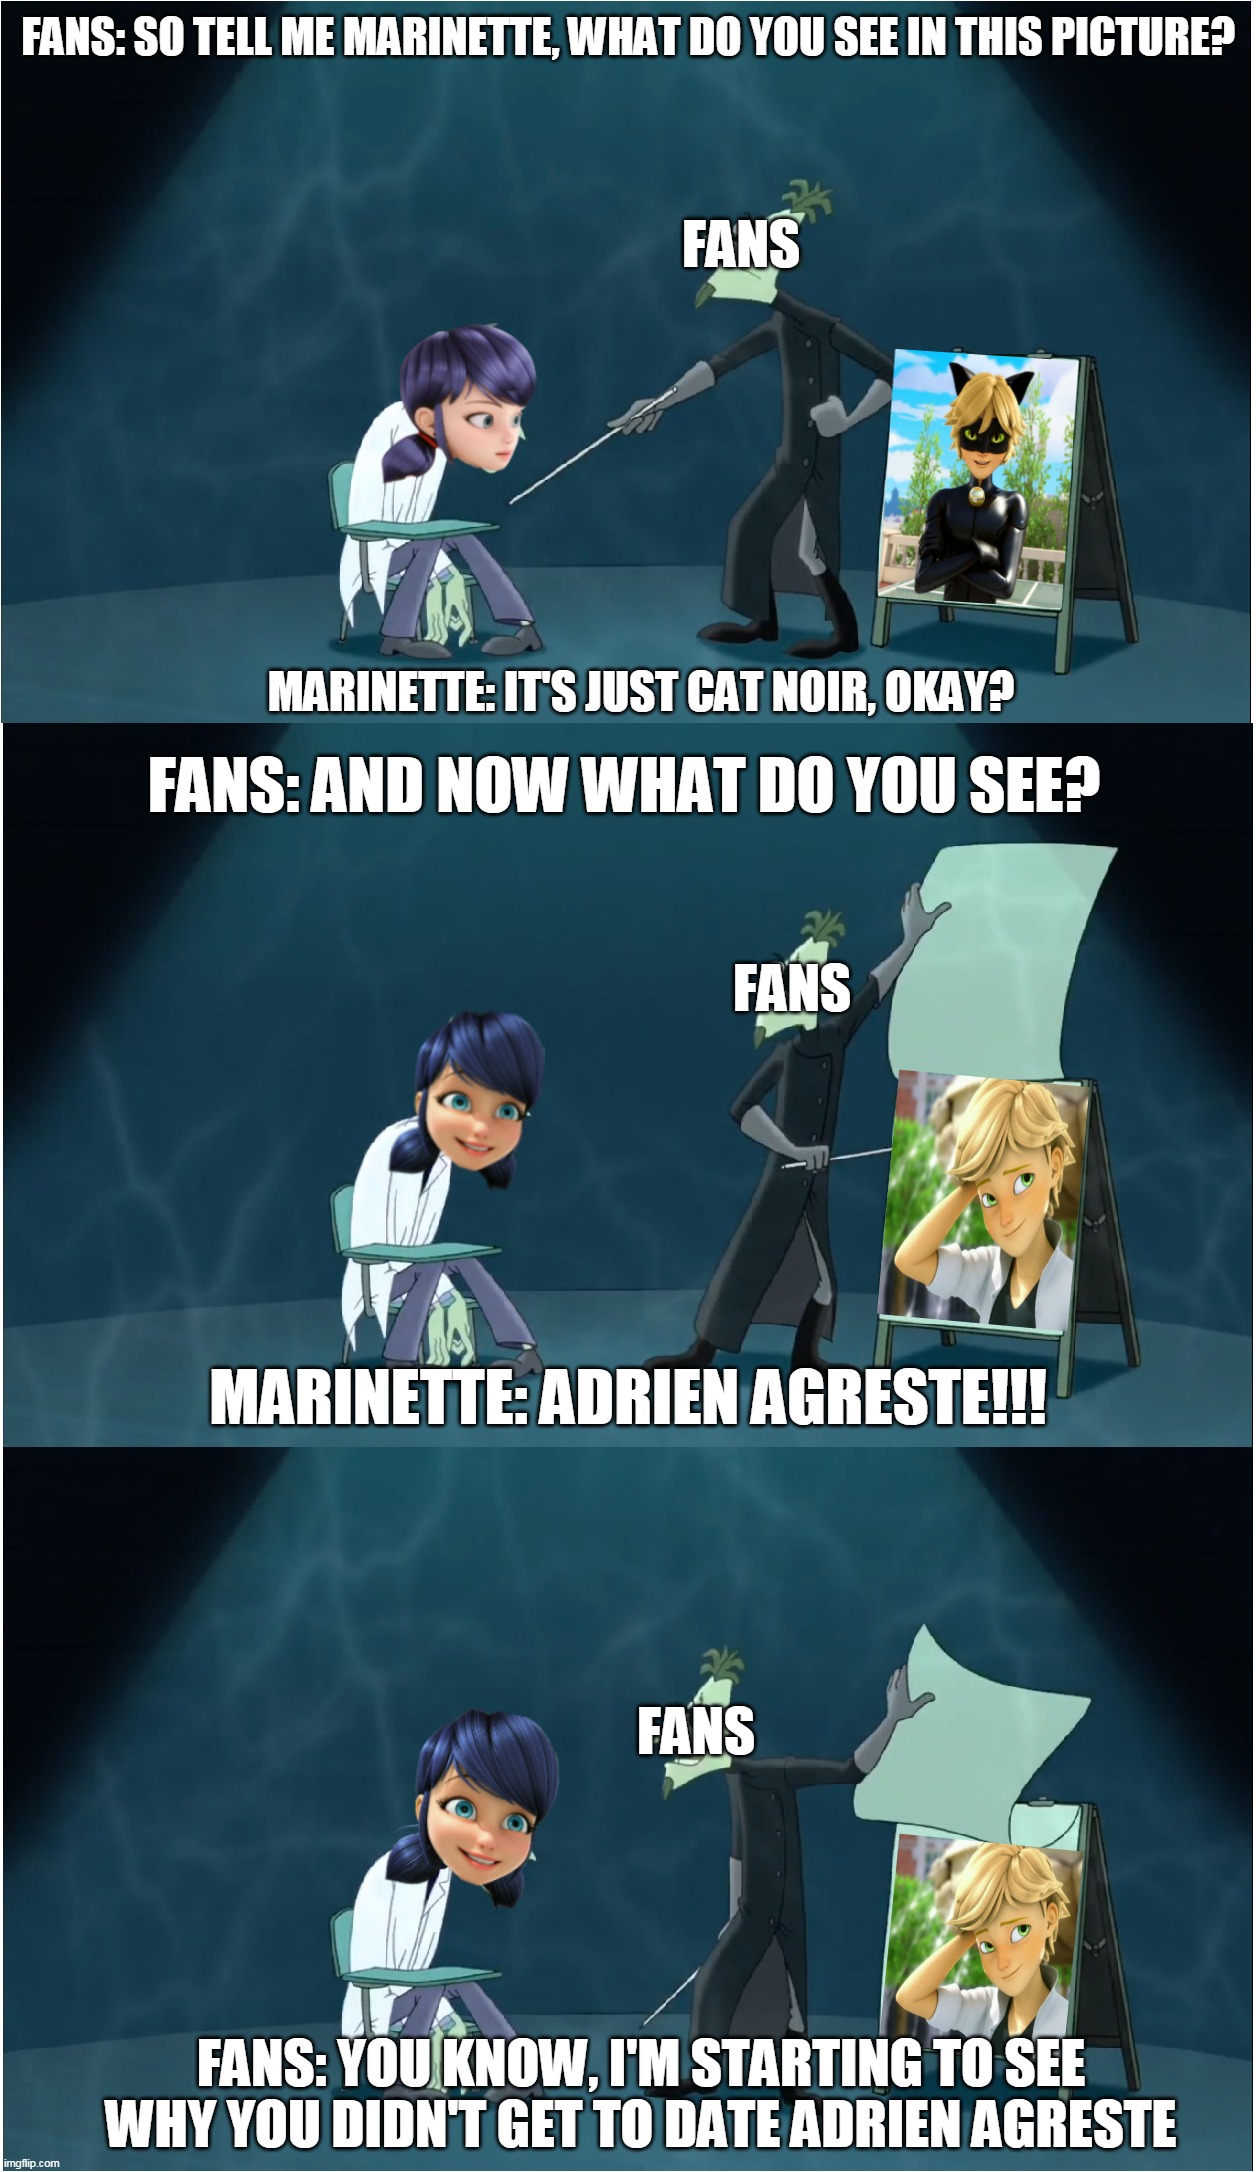 Why Marinette Won't Get Adrien Agreste? | FANS: SO TELL ME MARINETTE, WHAT DO YOU SEE IN THIS PICTURE? FANS; MARINETTE: IT'S JUST CAT NOIR, OKAY? FANS: AND NOW WHAT DO YOU SEE? FANS; MARINETTE: ADRIEN AGRESTE!!! FANS; FANS: YOU KNOW, I'M STARTING TO SEE WHY YOU DIDN'T GET TO DATE ADRIEN AGRESTE | image tagged in memes,miraculous ladybug,doofenshmirtz,phineas and ferb,marinette,adrien agreste | made w/ Imgflip meme maker